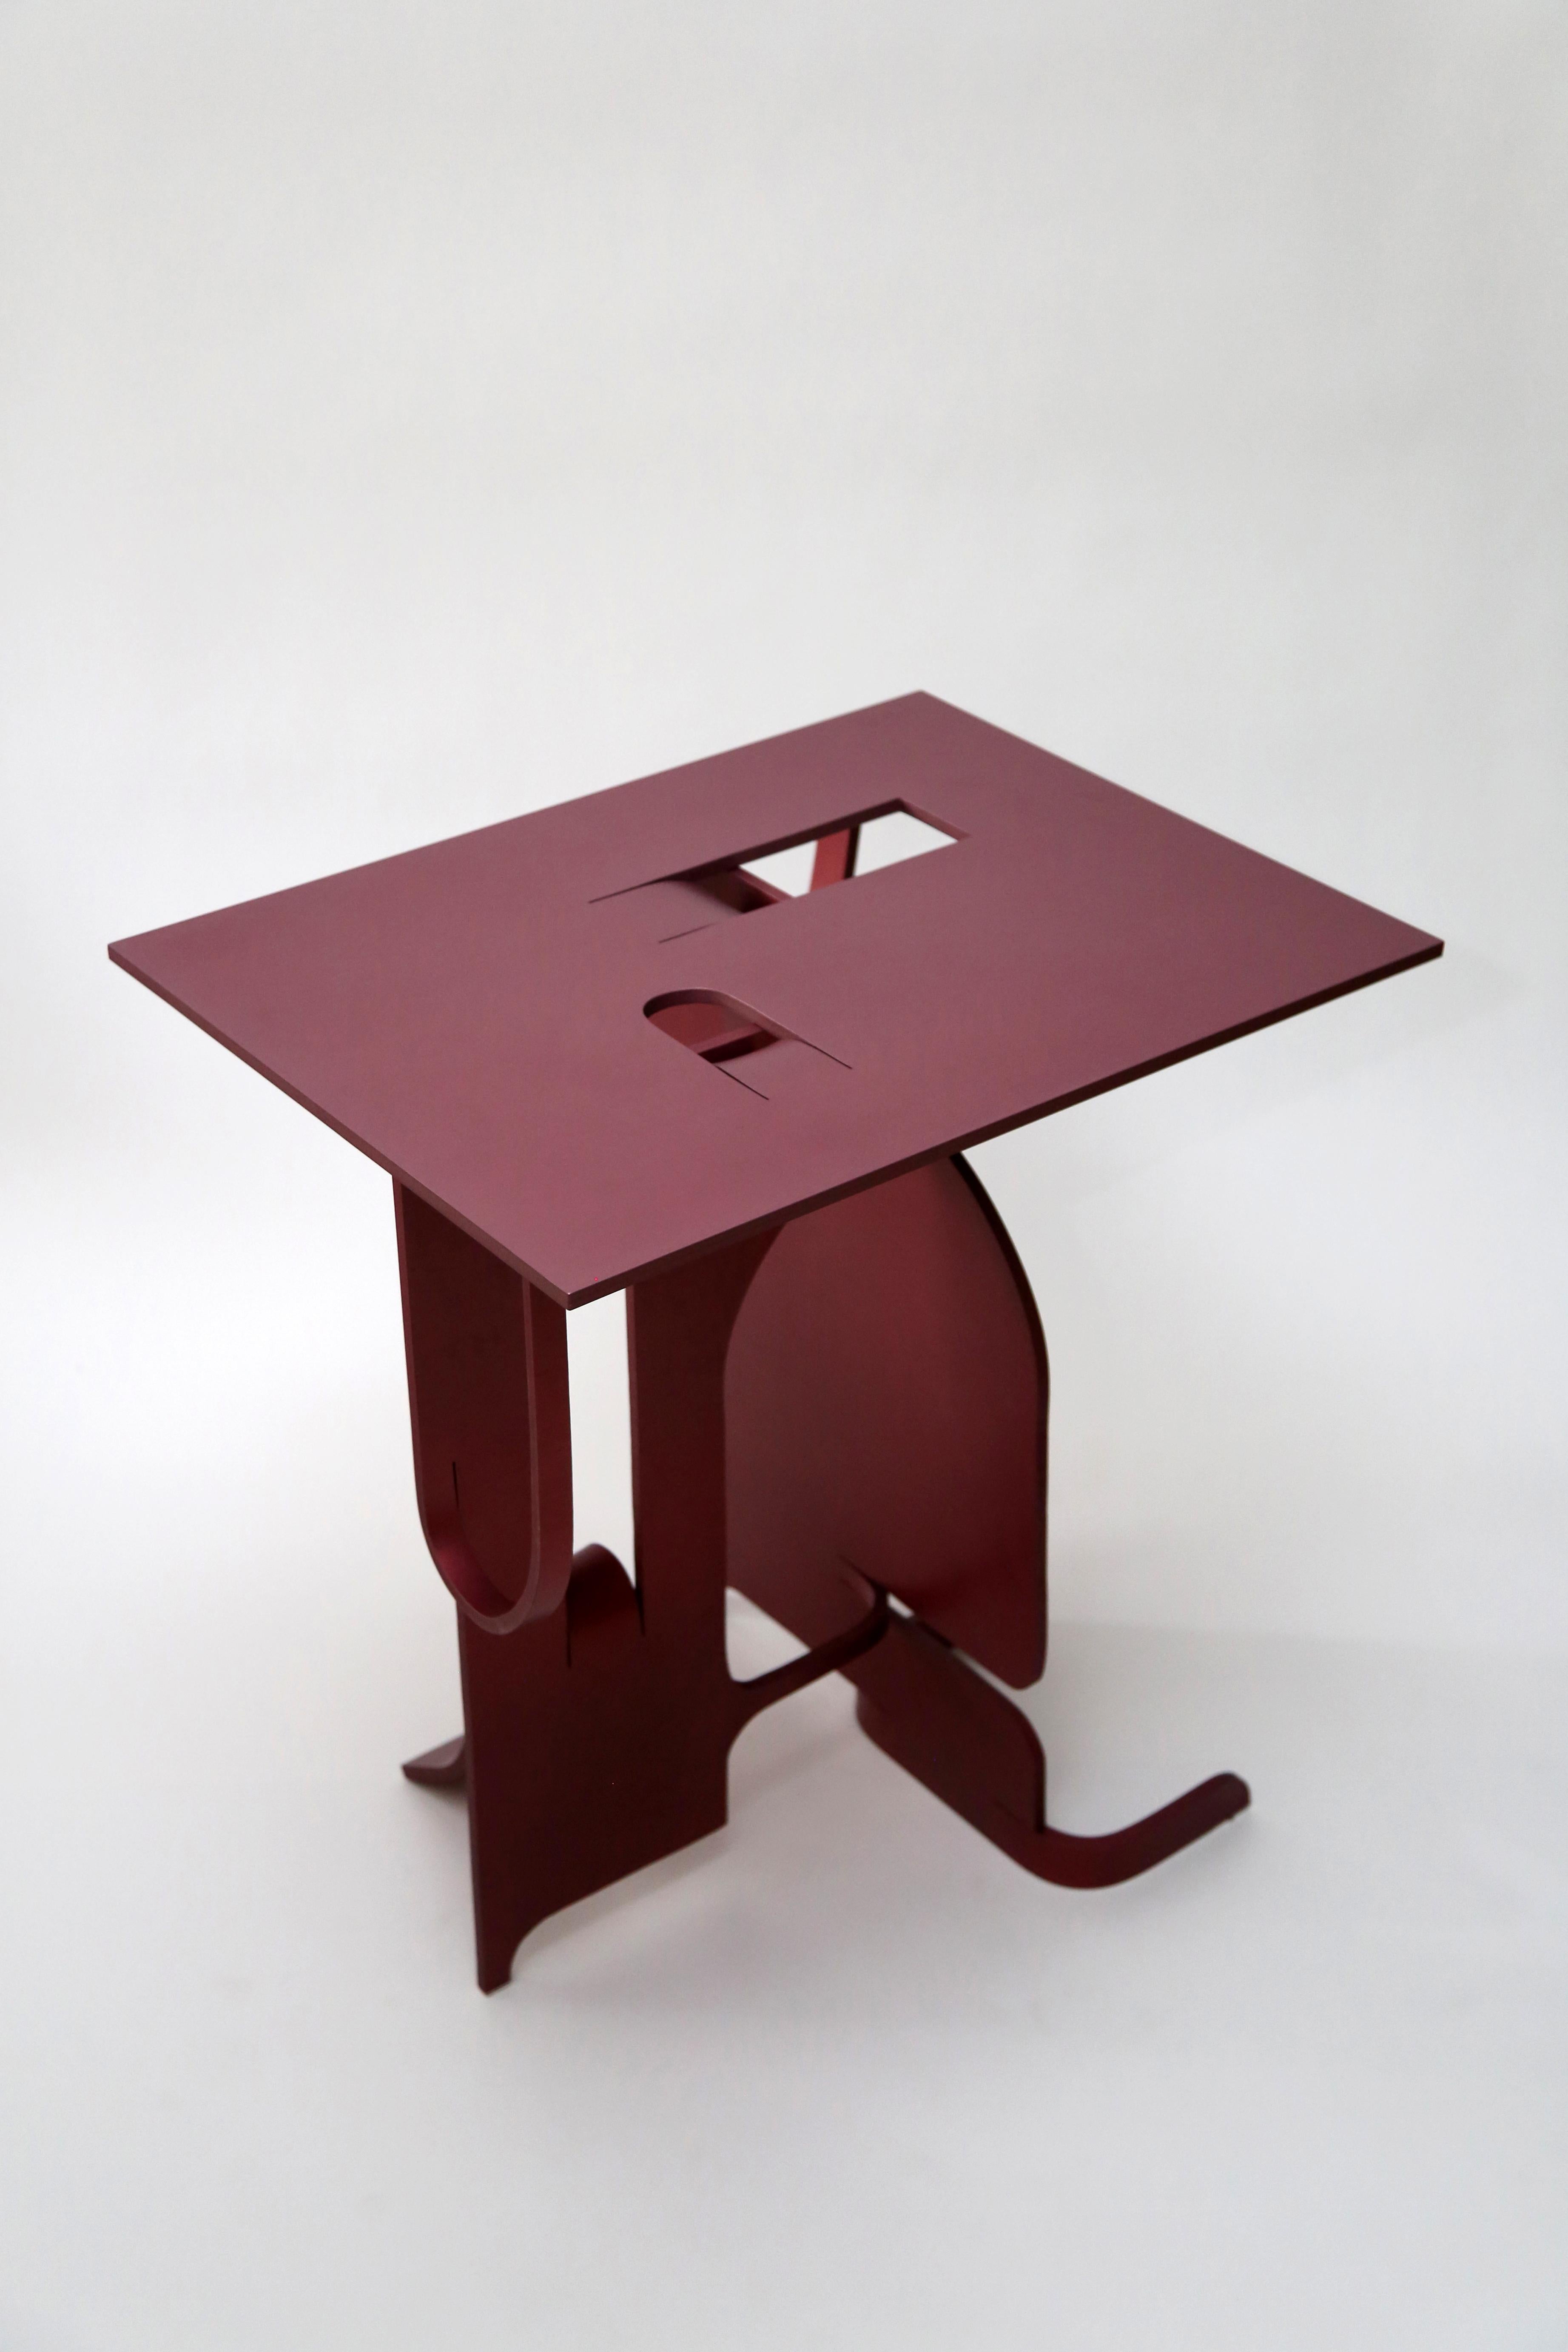 Unique handmade anodized aluminium table from the 